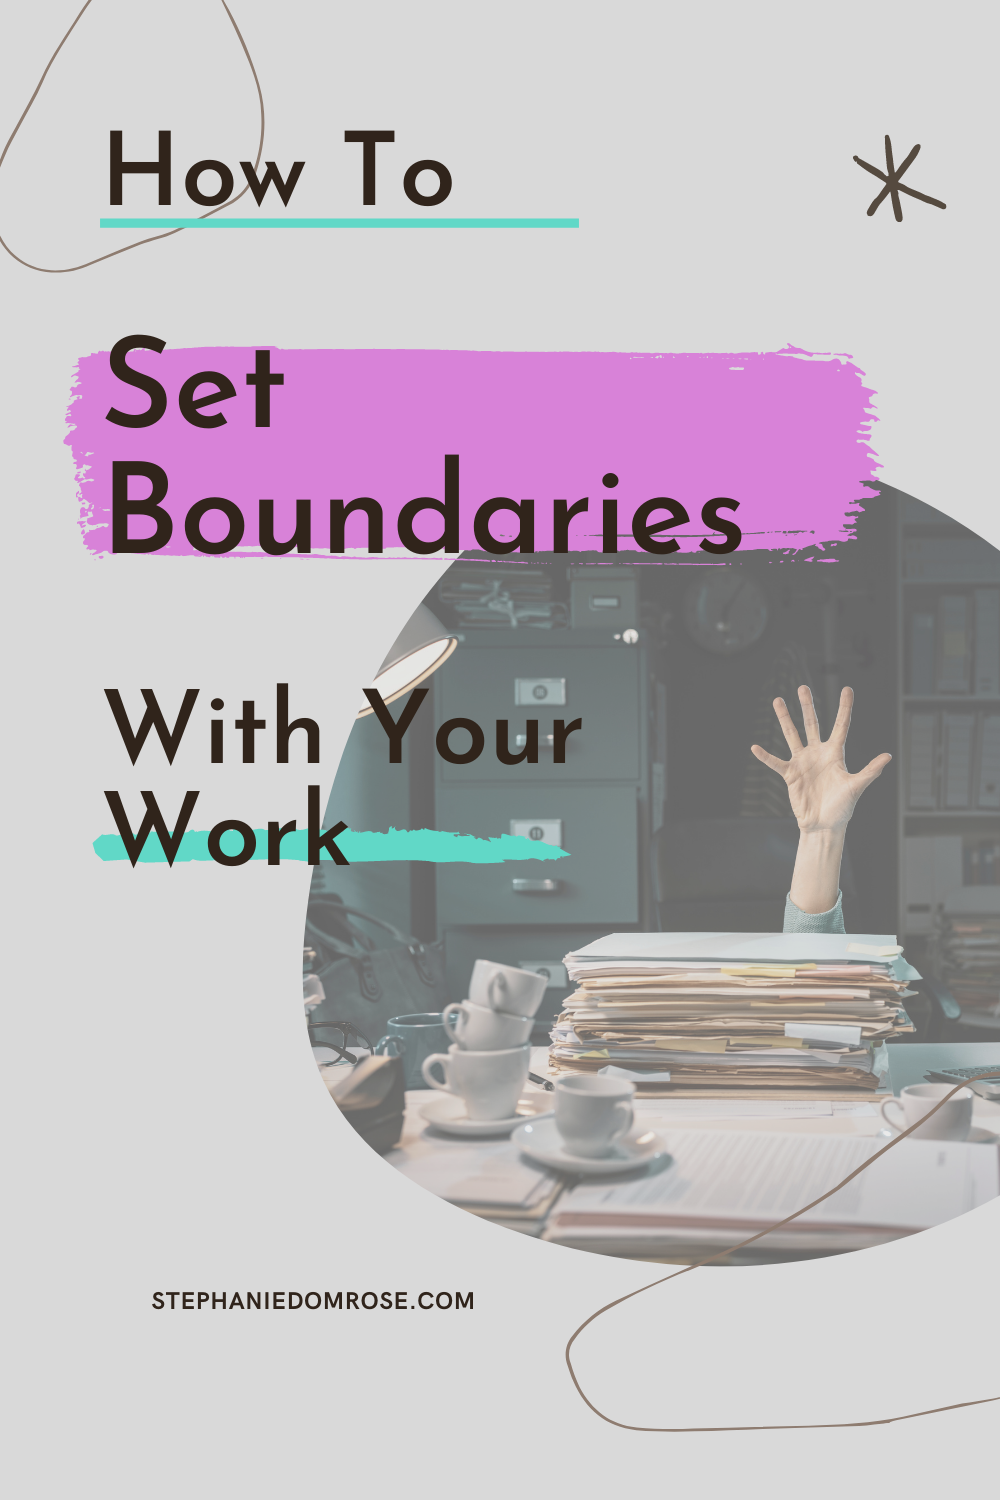 How to set boundaries with your work